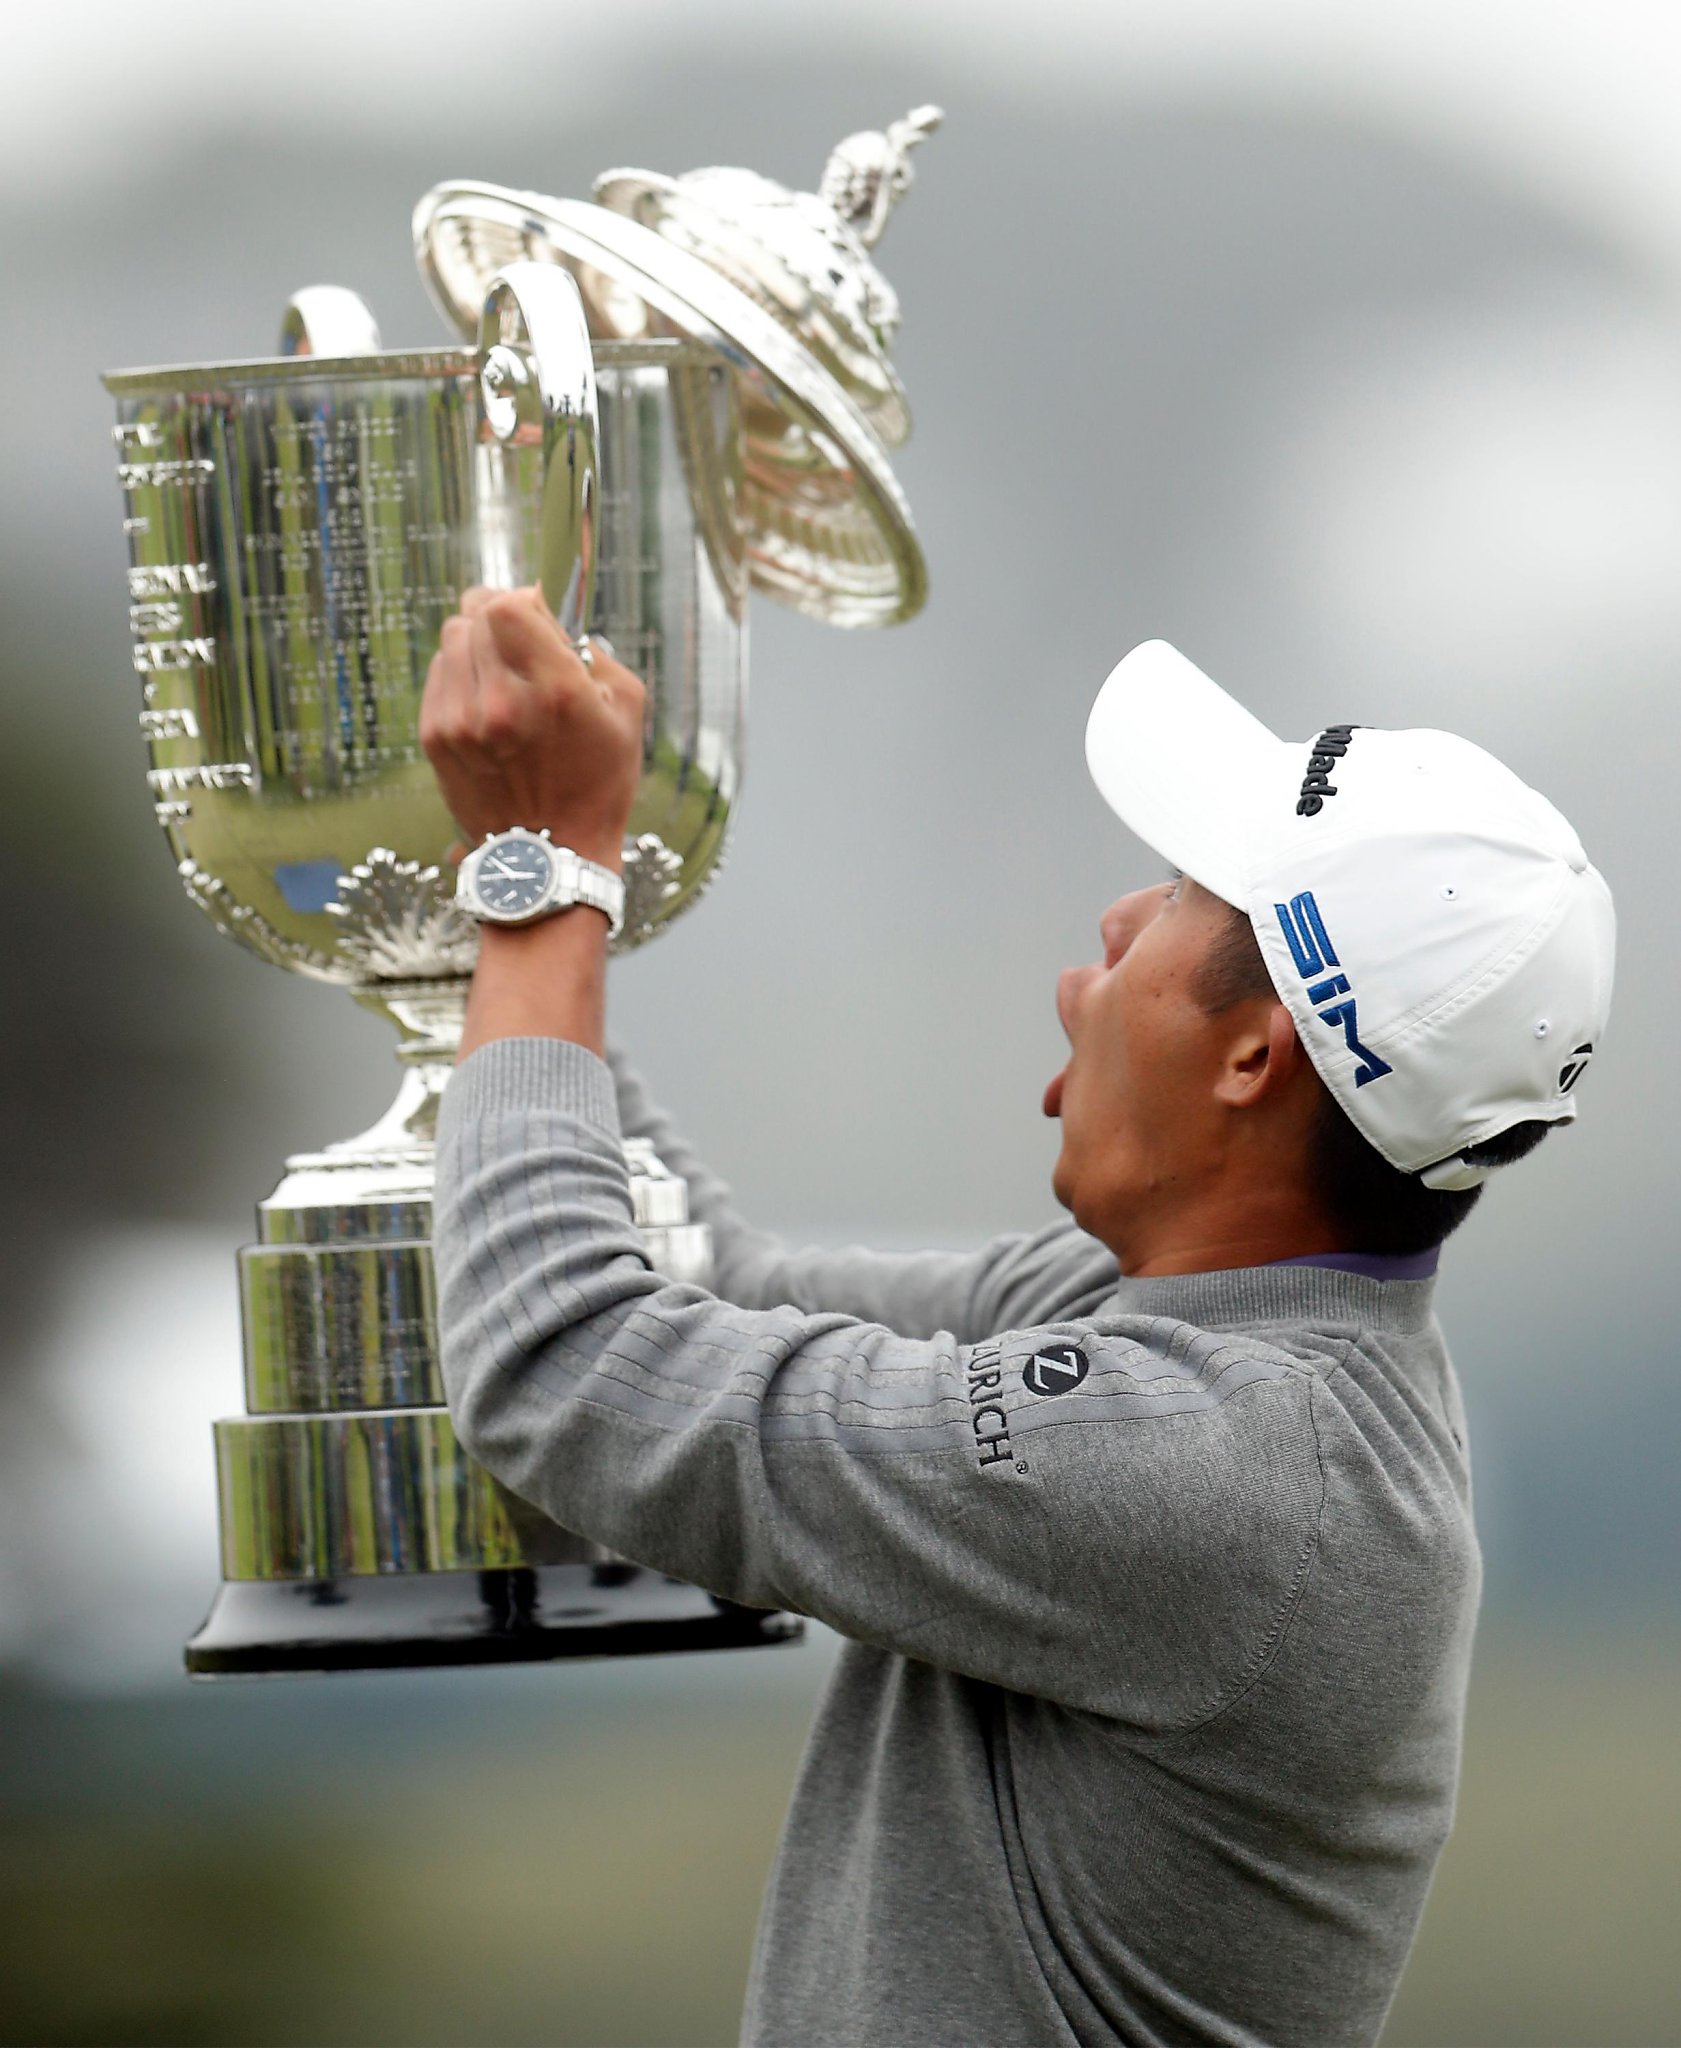 Collin Morikawa thrives in clutch, wins first major title